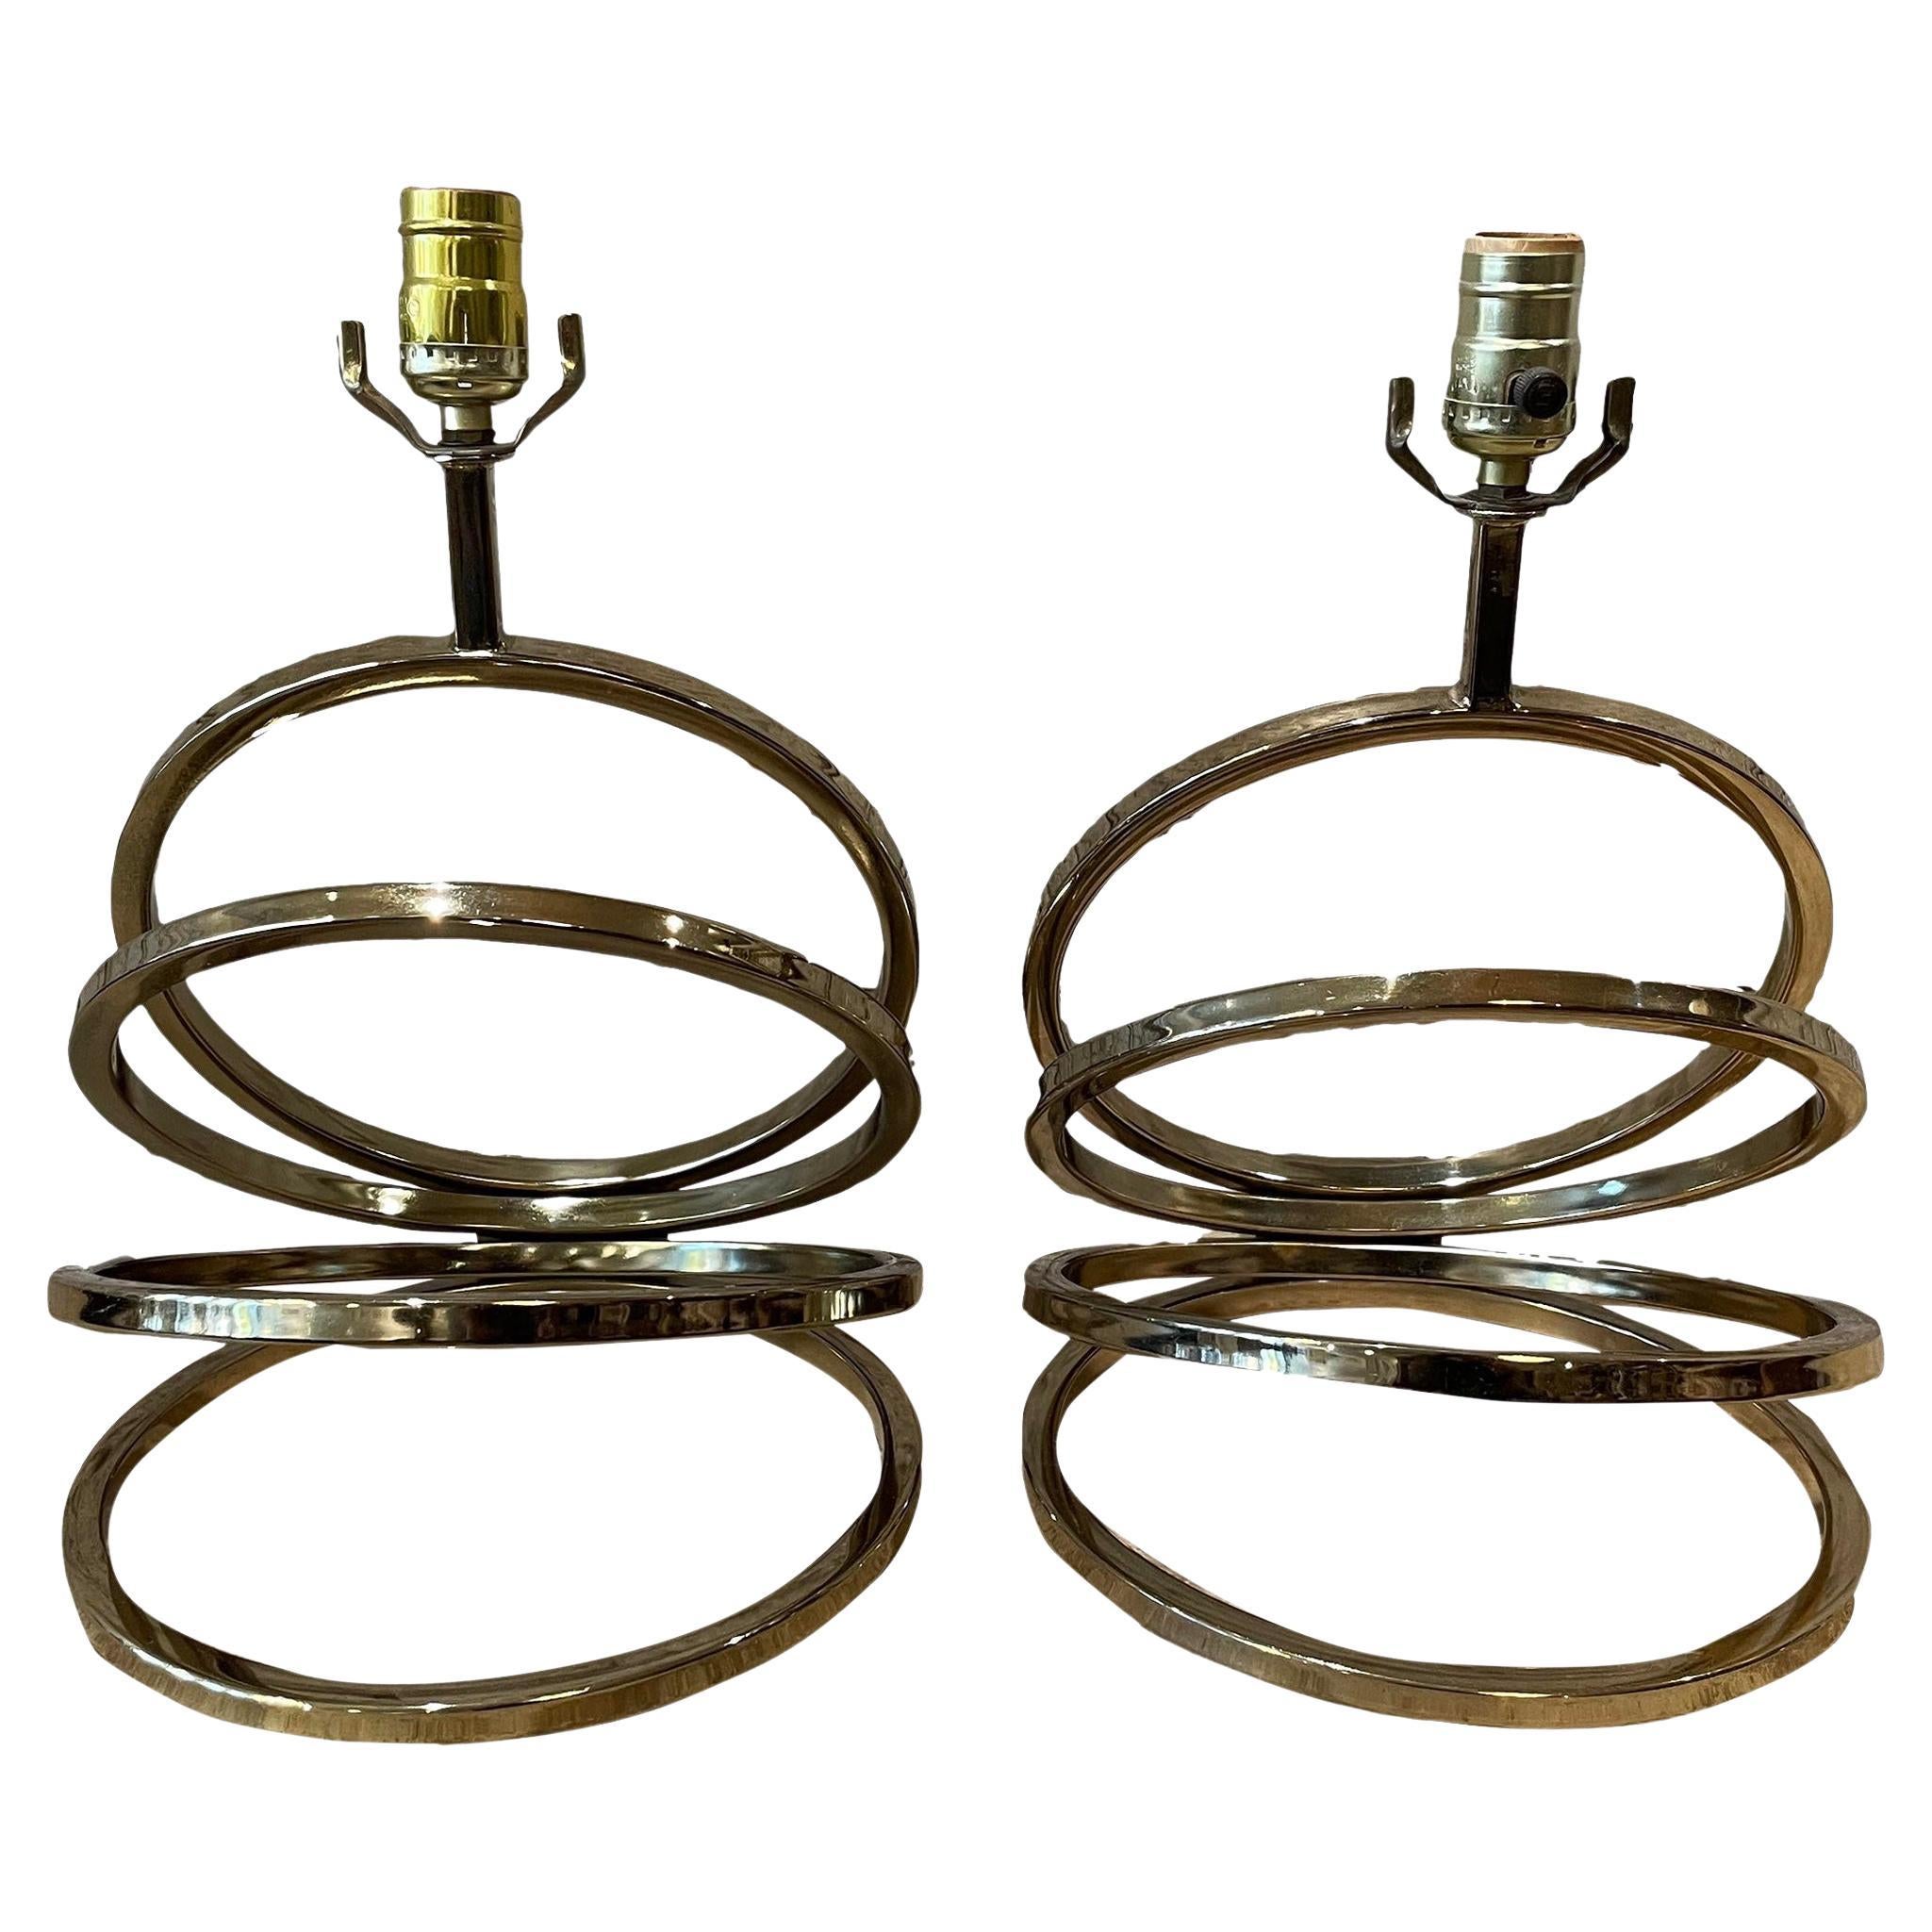 1960s Hollywood Regency Mid Century Vintage Brass Spiral Lamps - a Pair For Sale